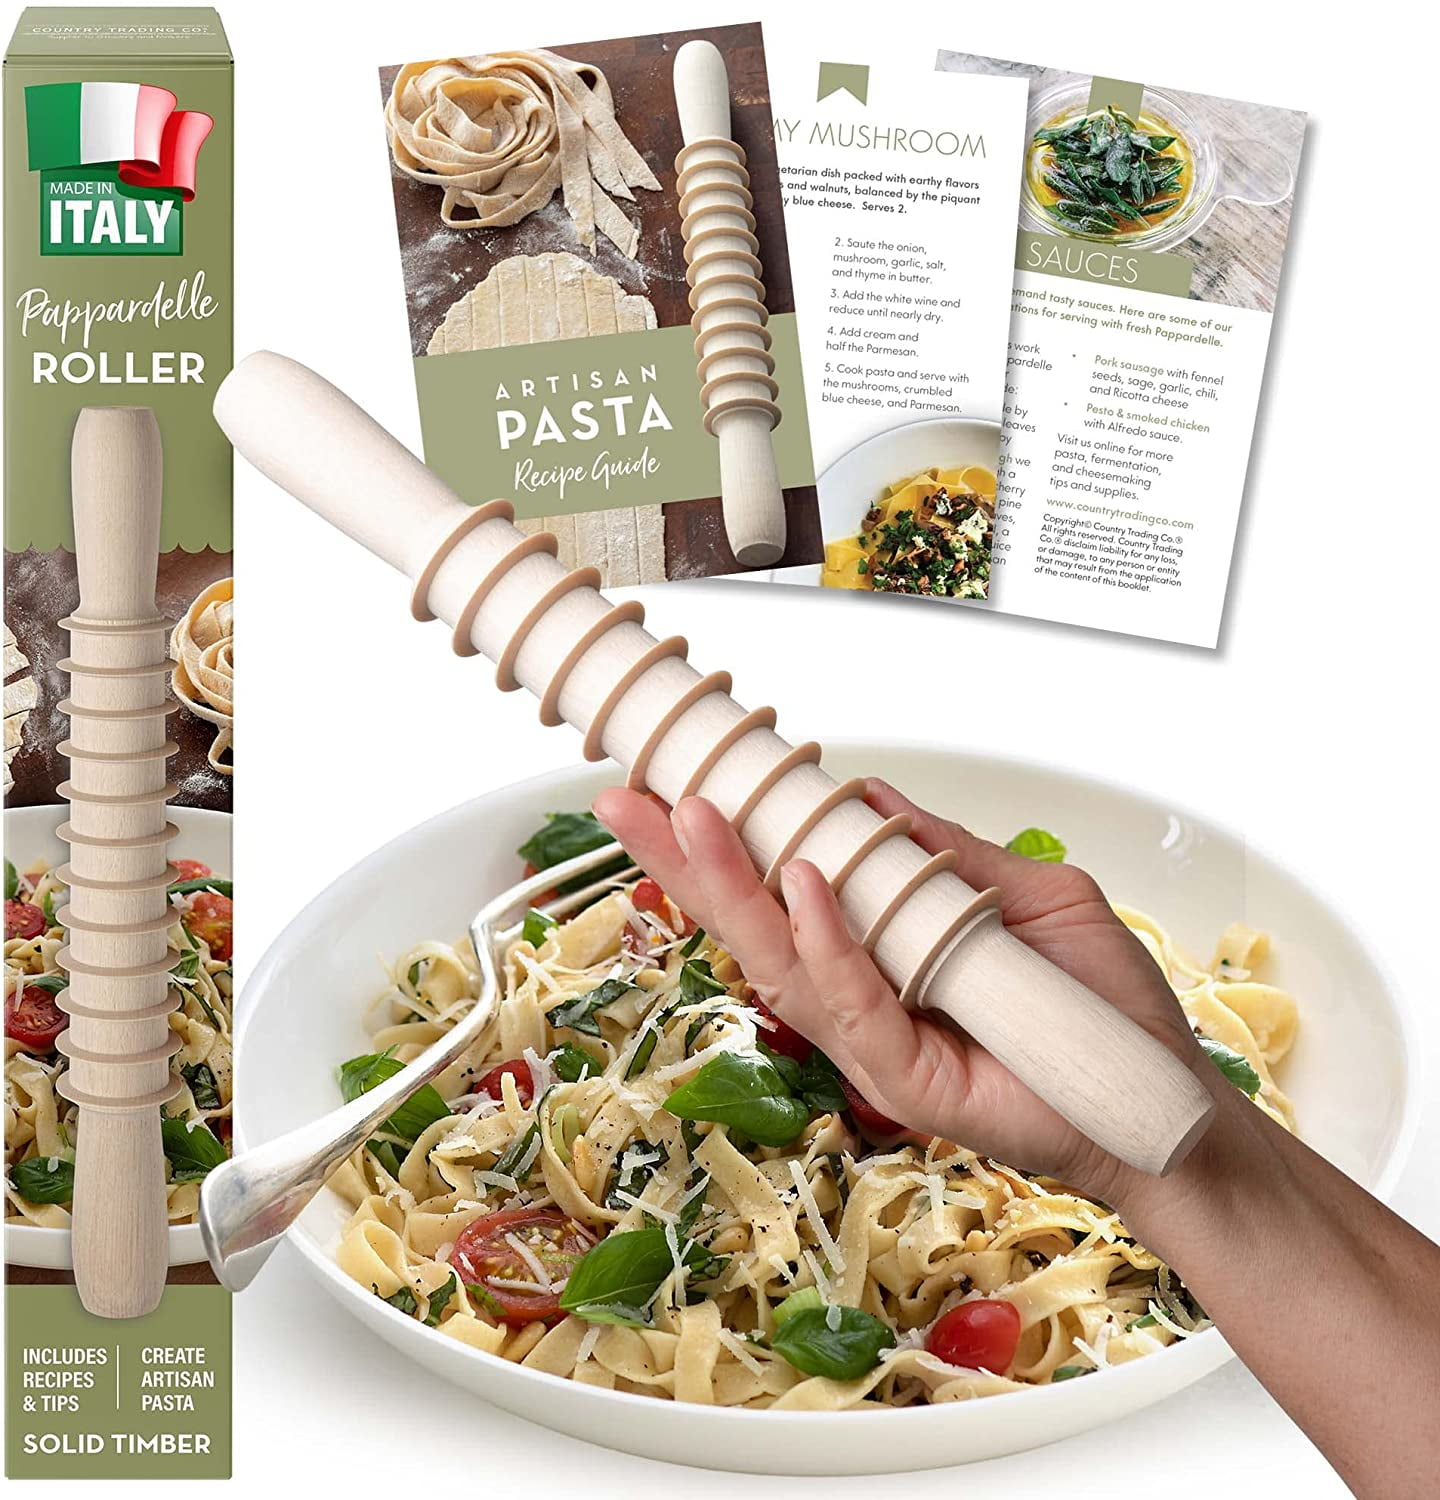  Marcato Pappardelle Attachment, Works with Pasta Machine